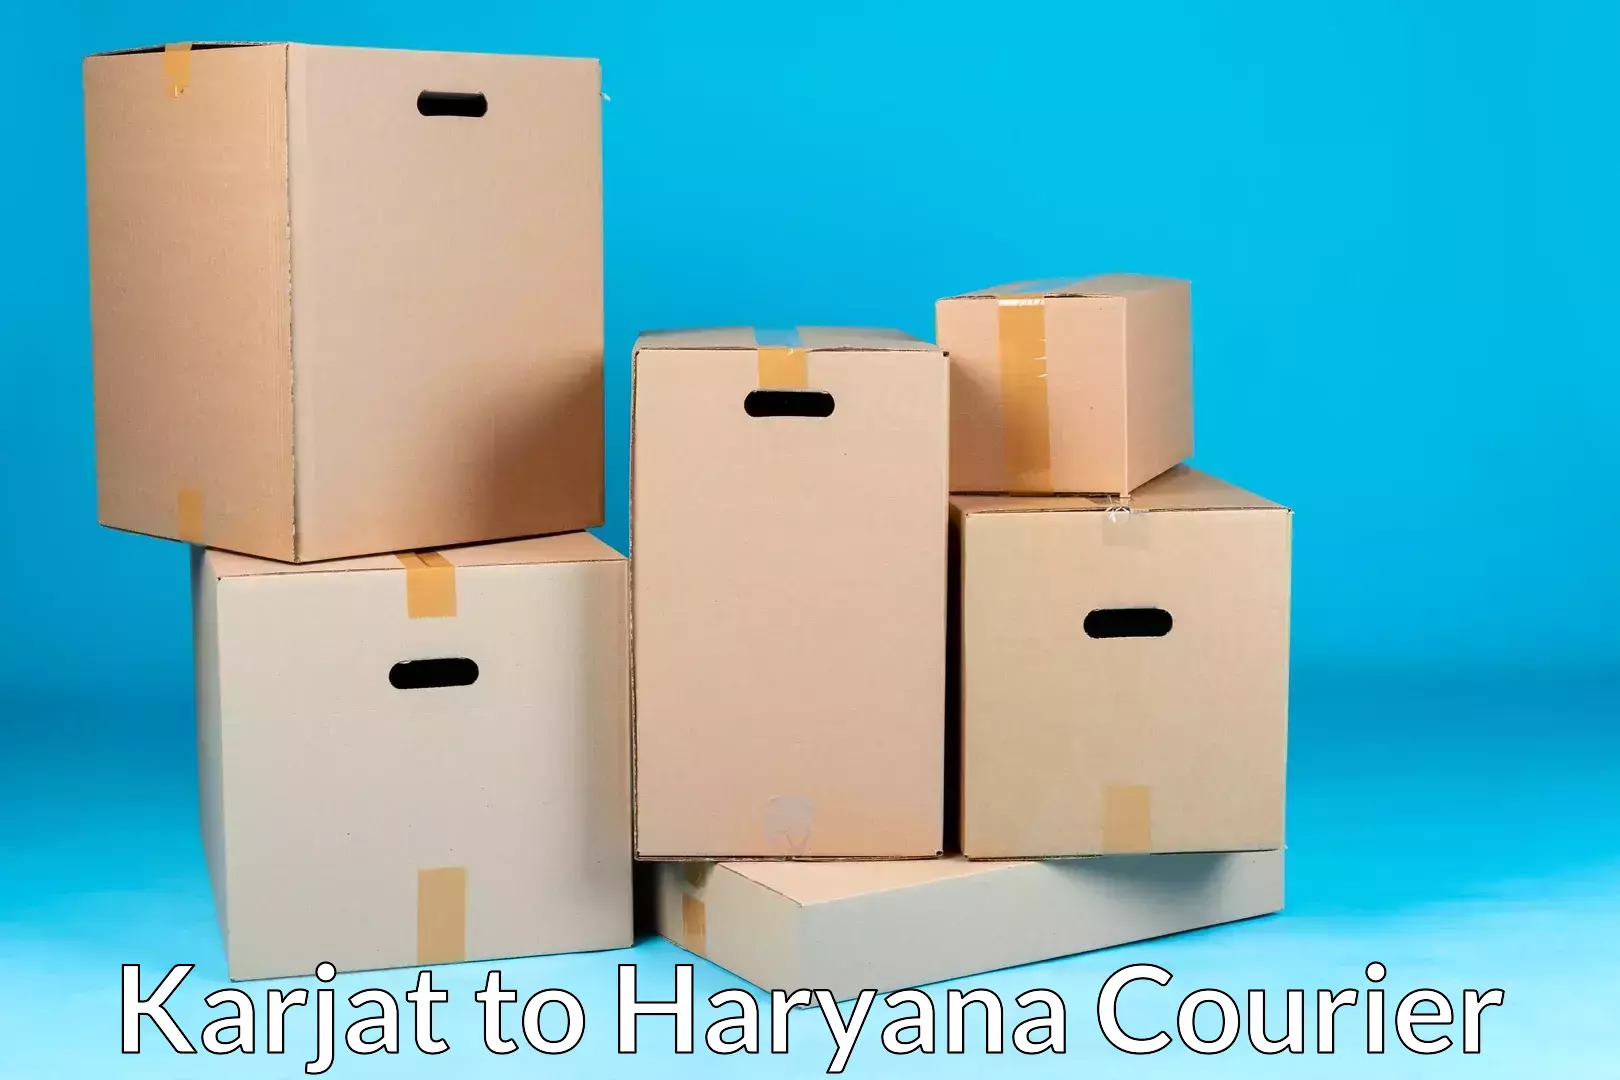 Hassle-free relocation Karjat to Kaithal